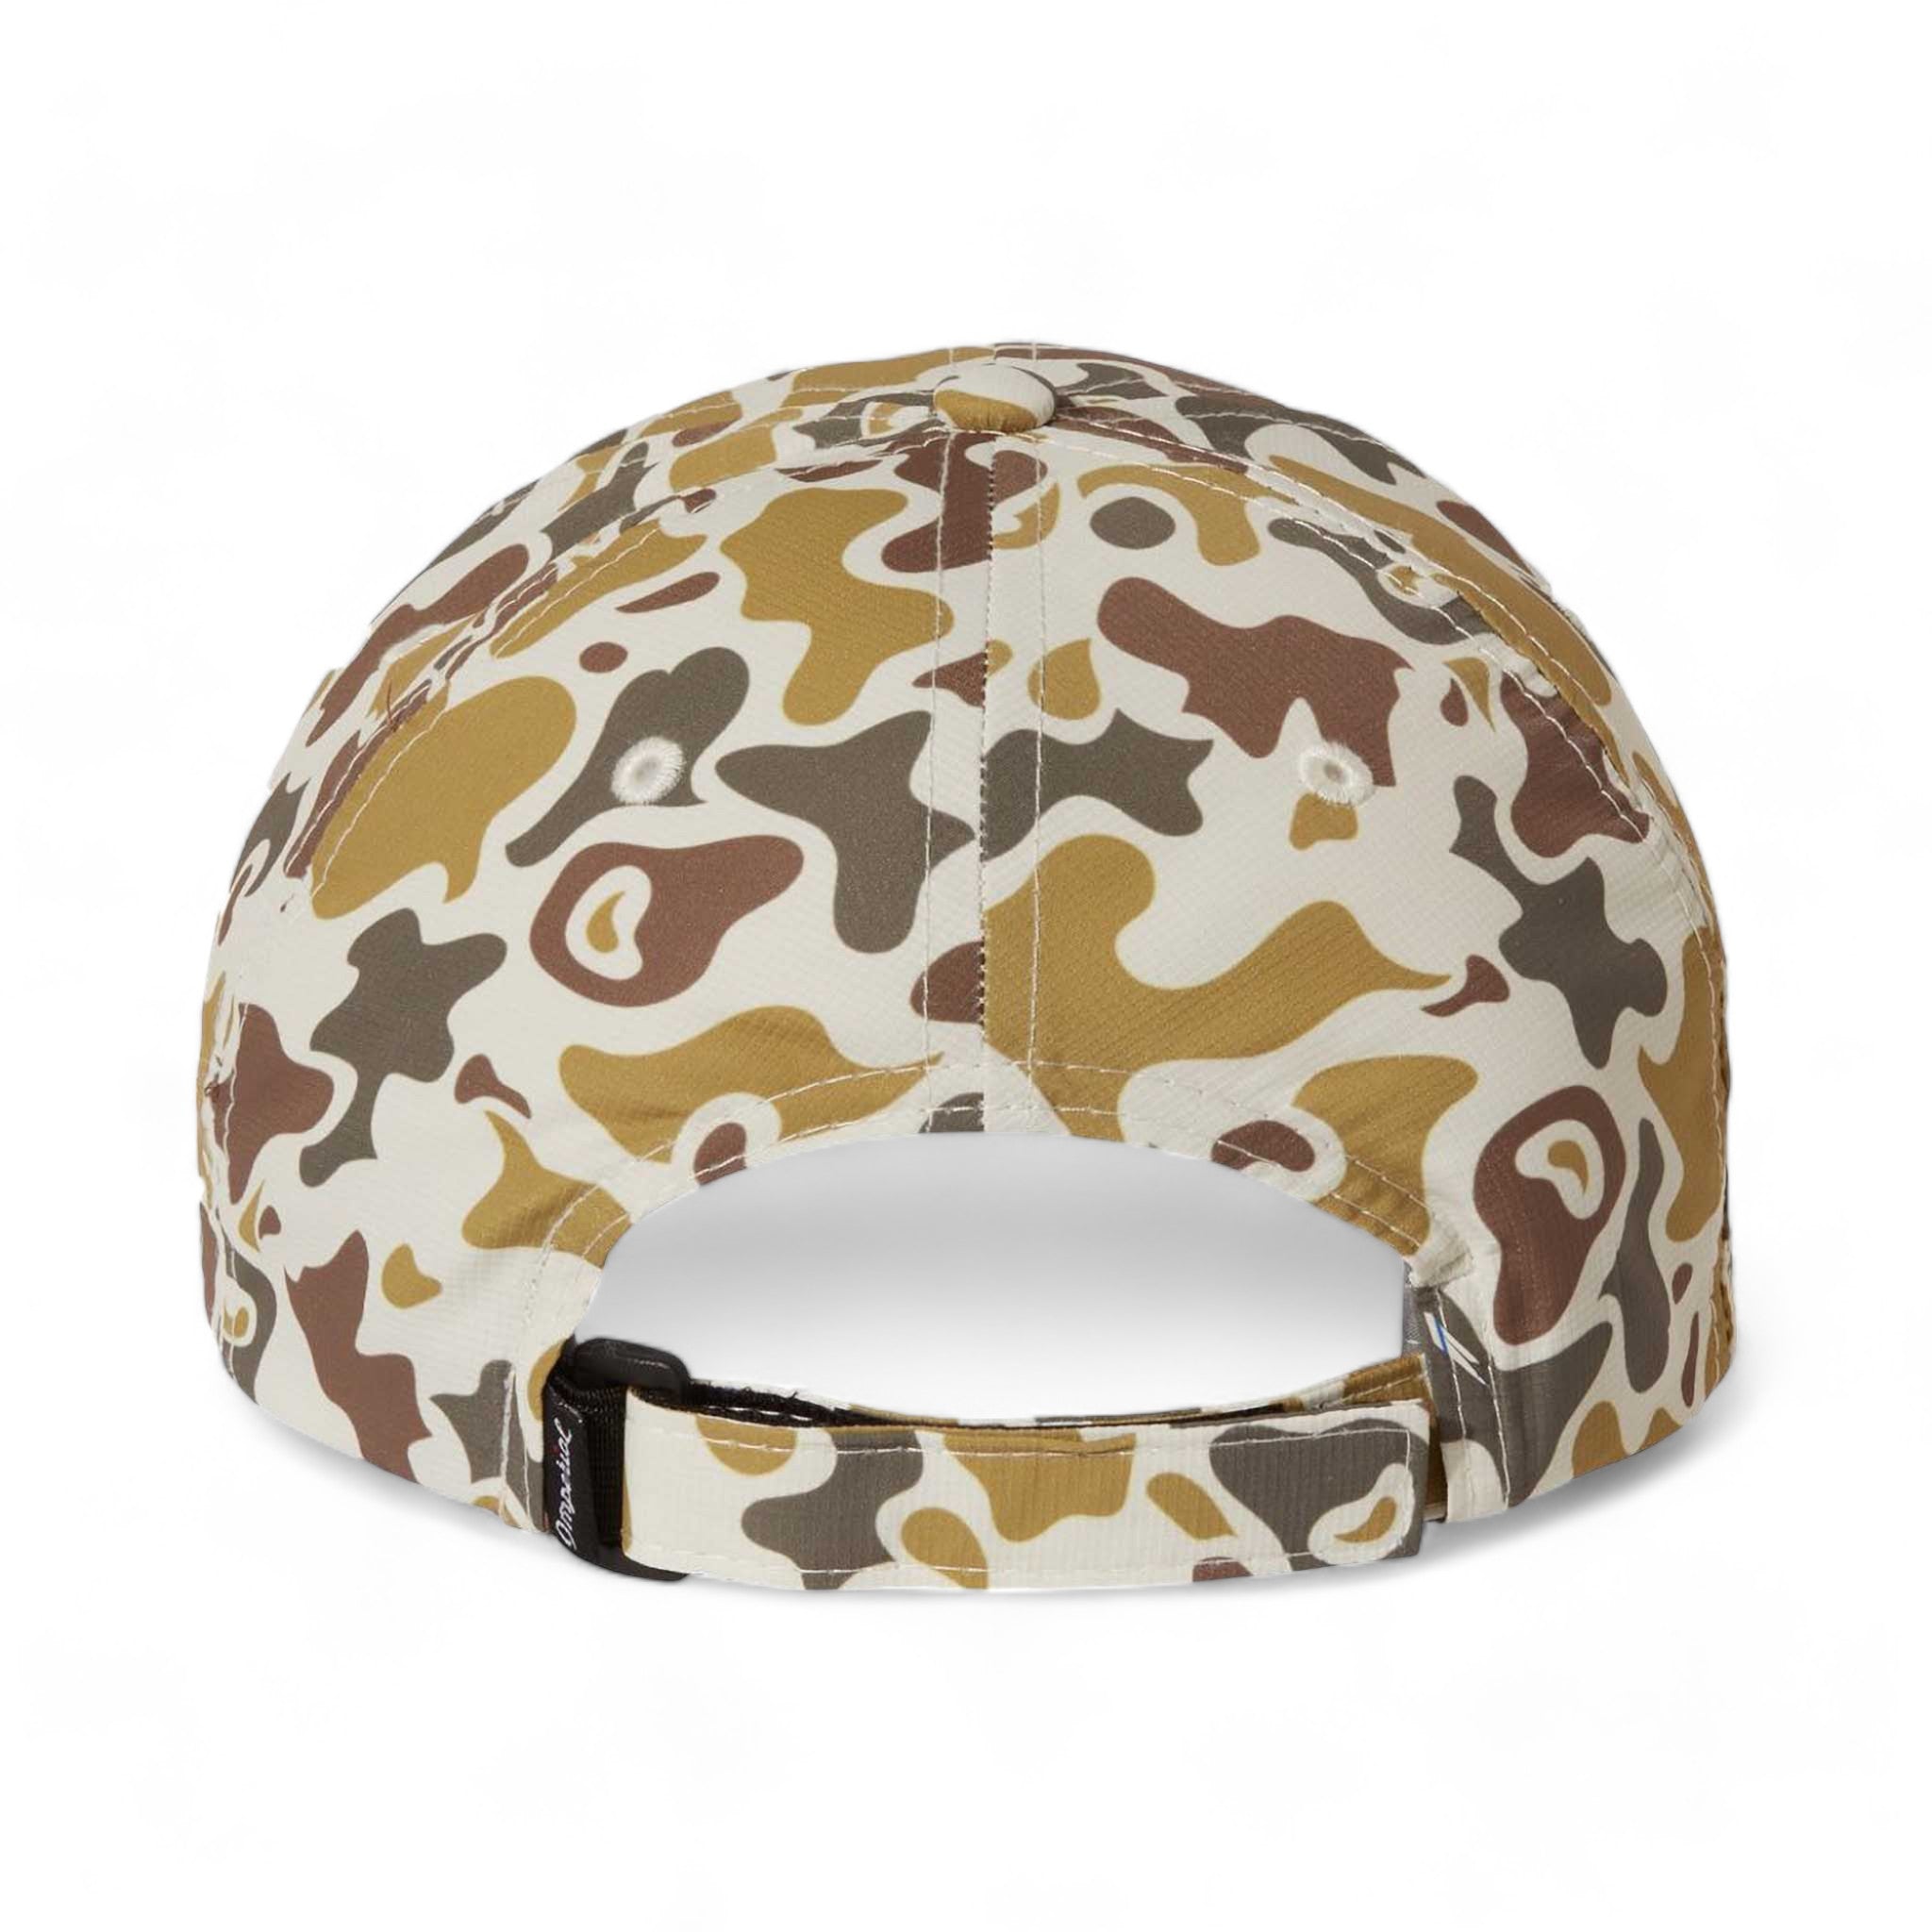 Back view of Imperial X210R custom hat in tan duck camo